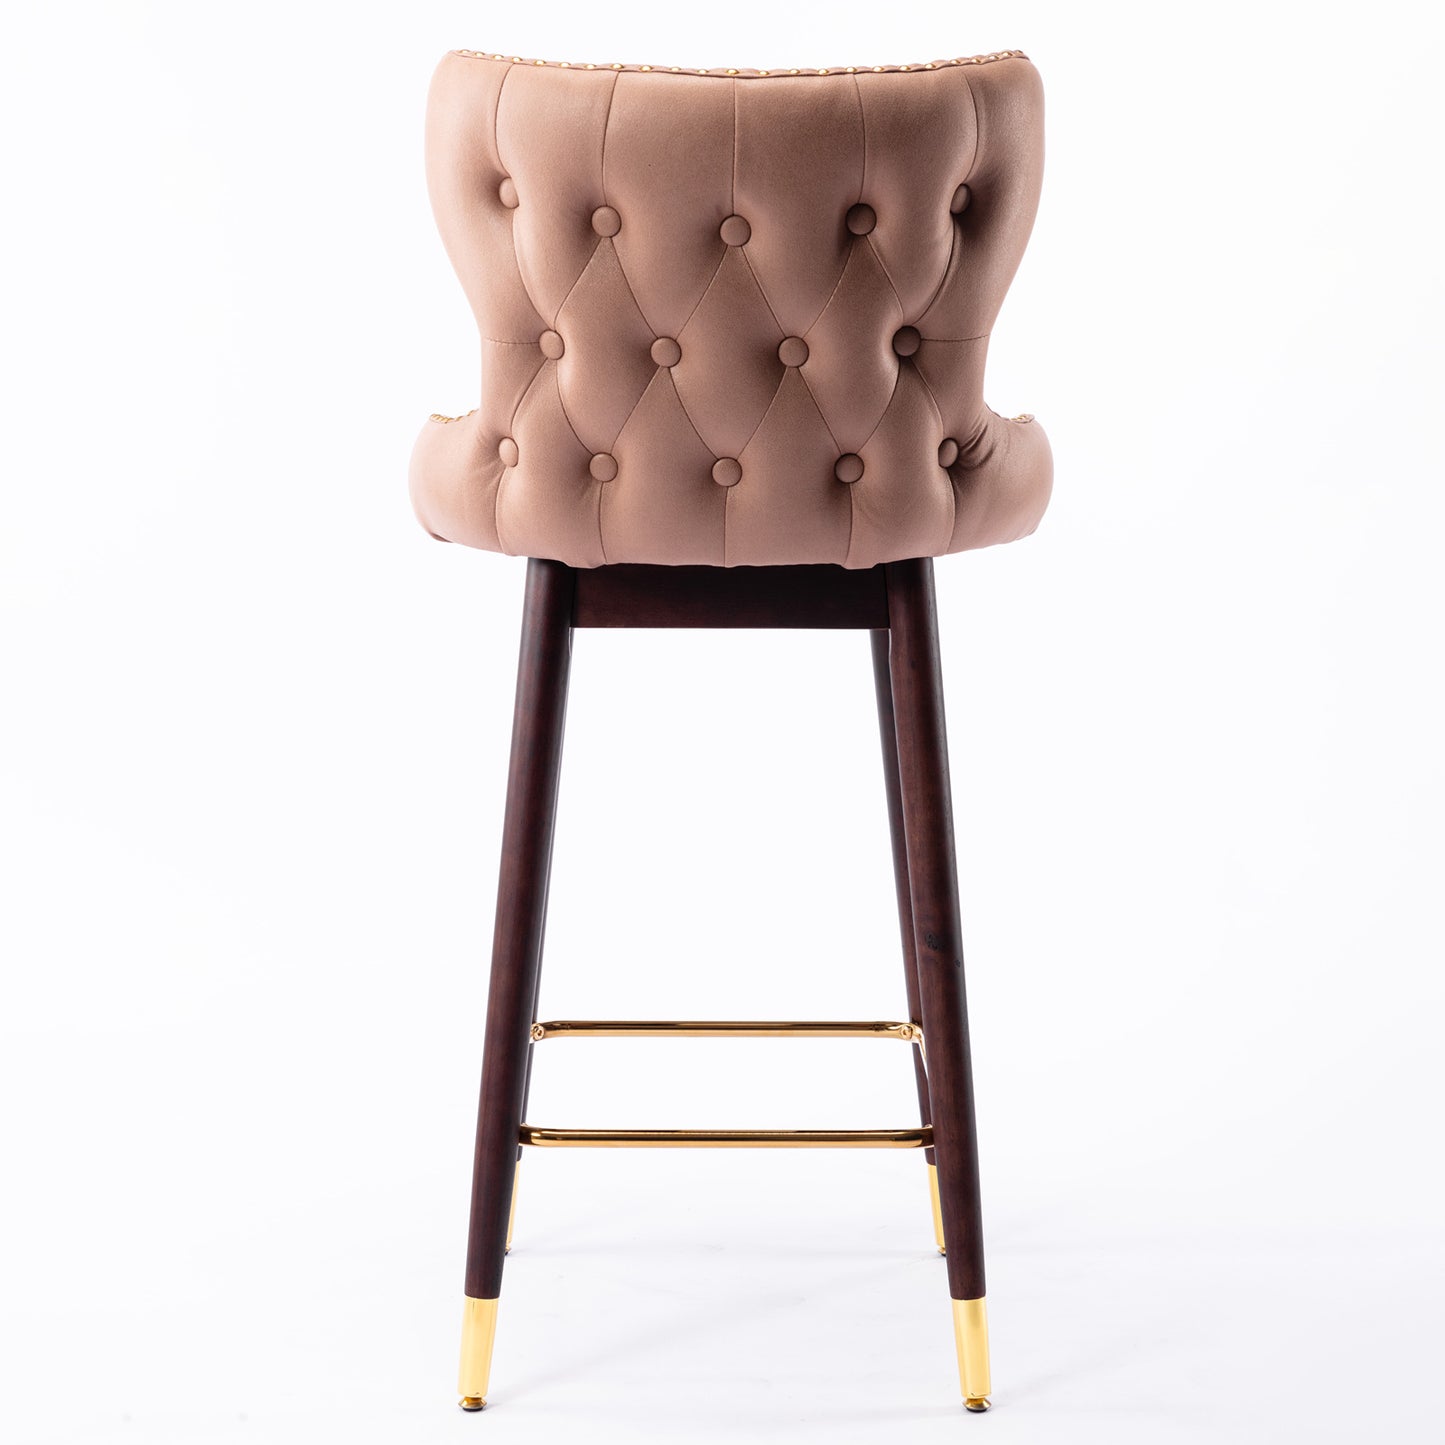 SYNGAR Modern Bar Chairs Set of 2, Contemporary Fabric Faux Leather Bar Stools Tool, Counter Stools with Tufted Nailheads and Wood Legs, High End Style Bar Chairs, khaki